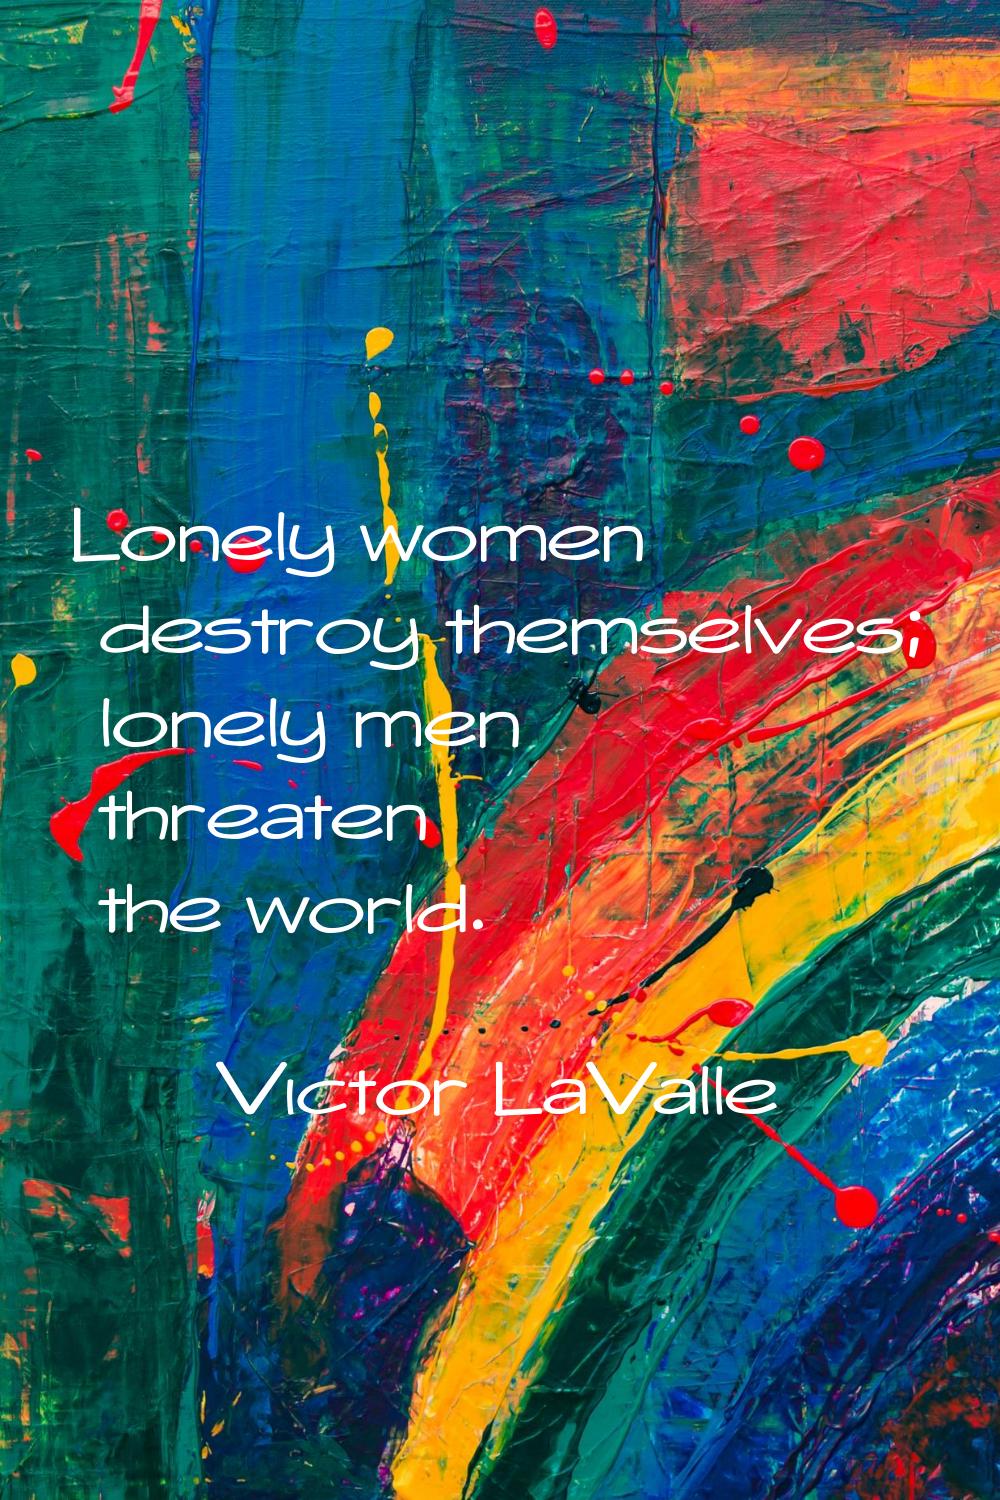 Lonely women destroy themselves; lonely men threaten the world.